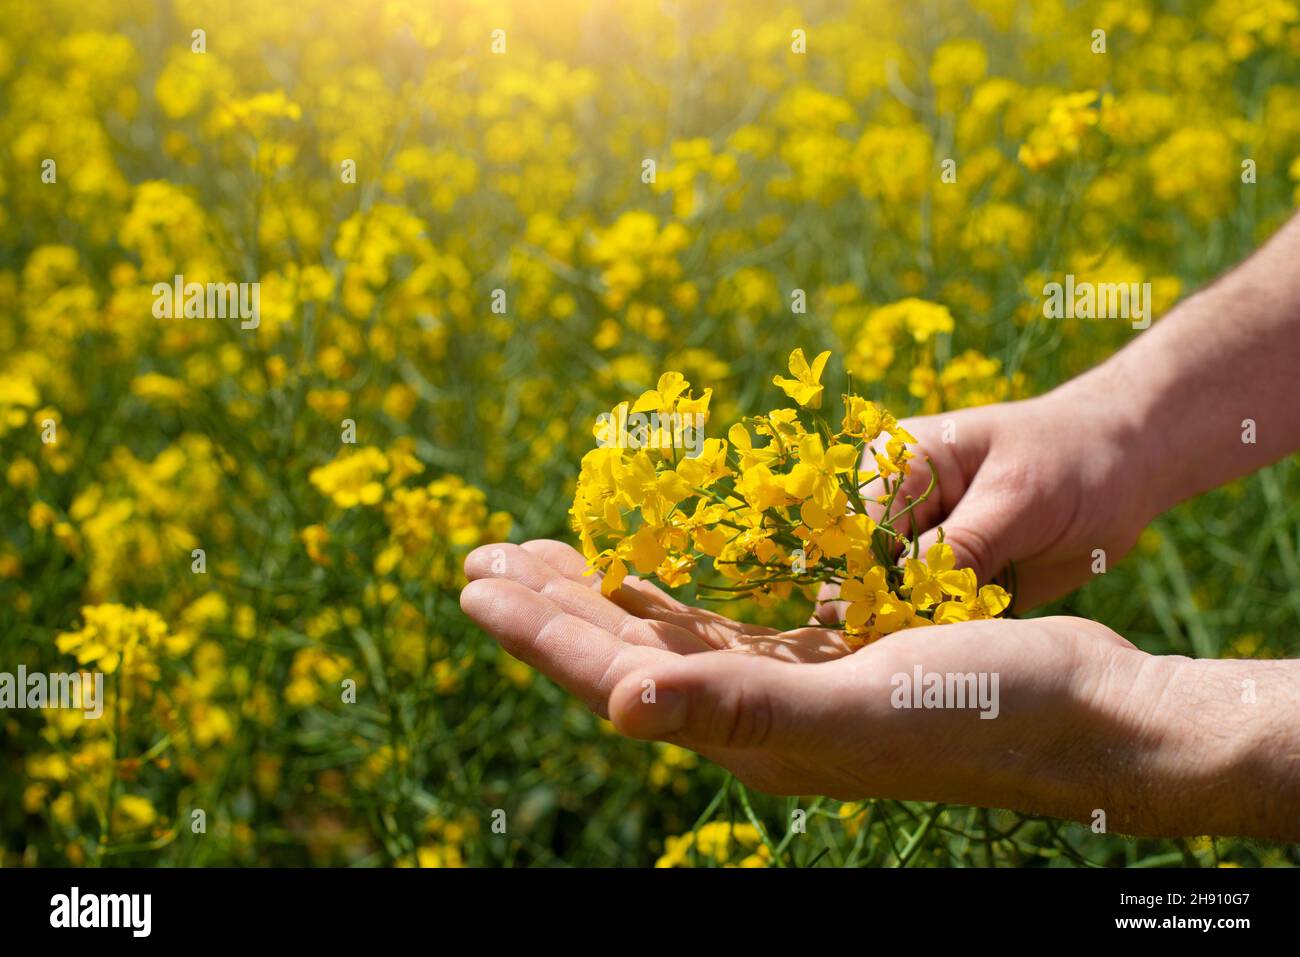 Canola flowers being held in human hand on oilseed feeld background. Stock Photo